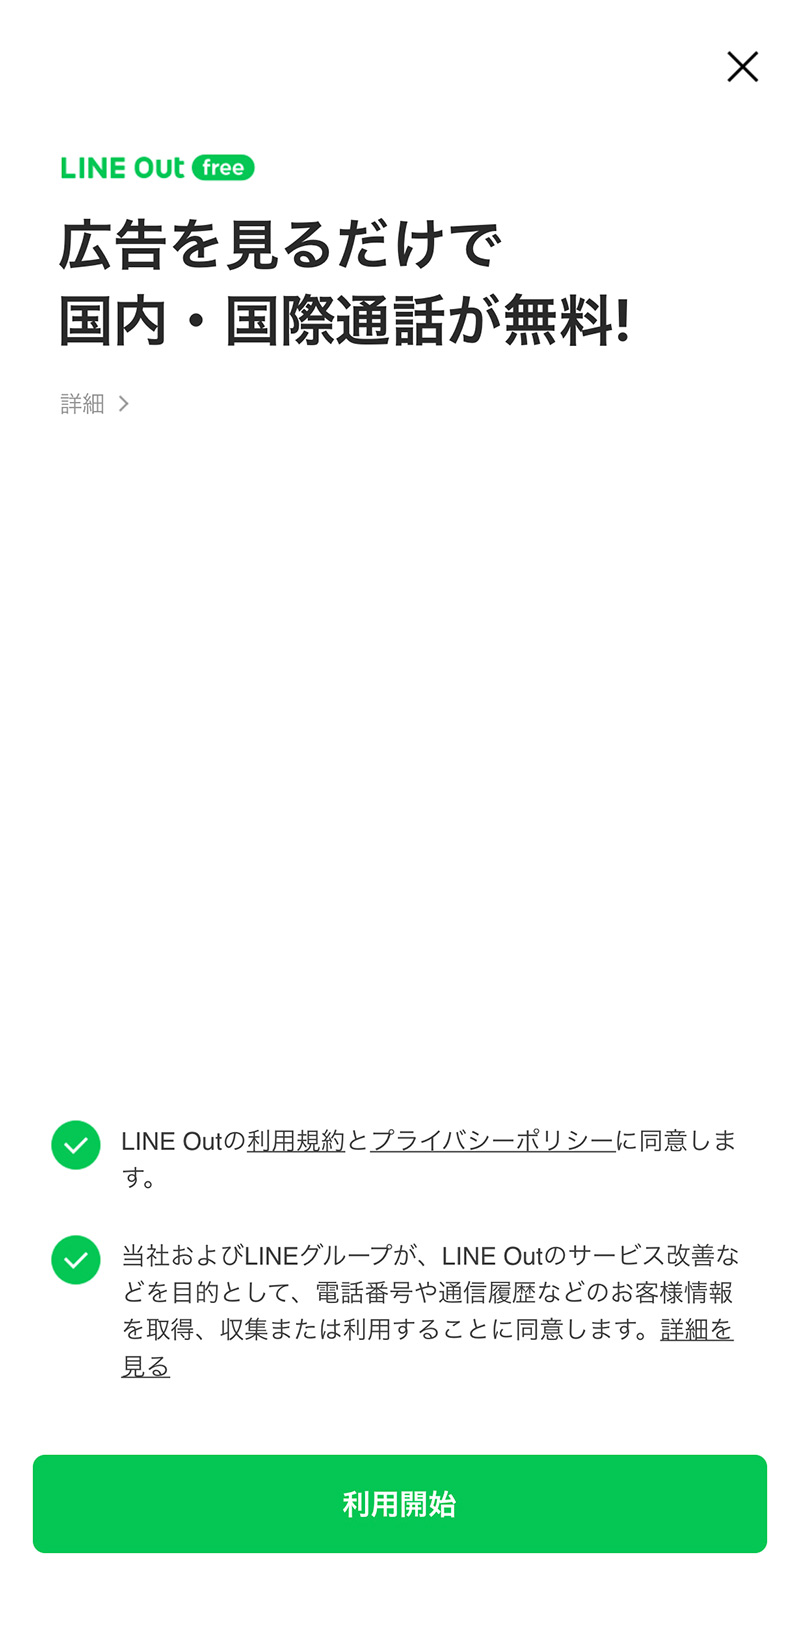 iiPhoneでLINEの「ニュース」タブを削除・非表示にする方法：Line Out free画面